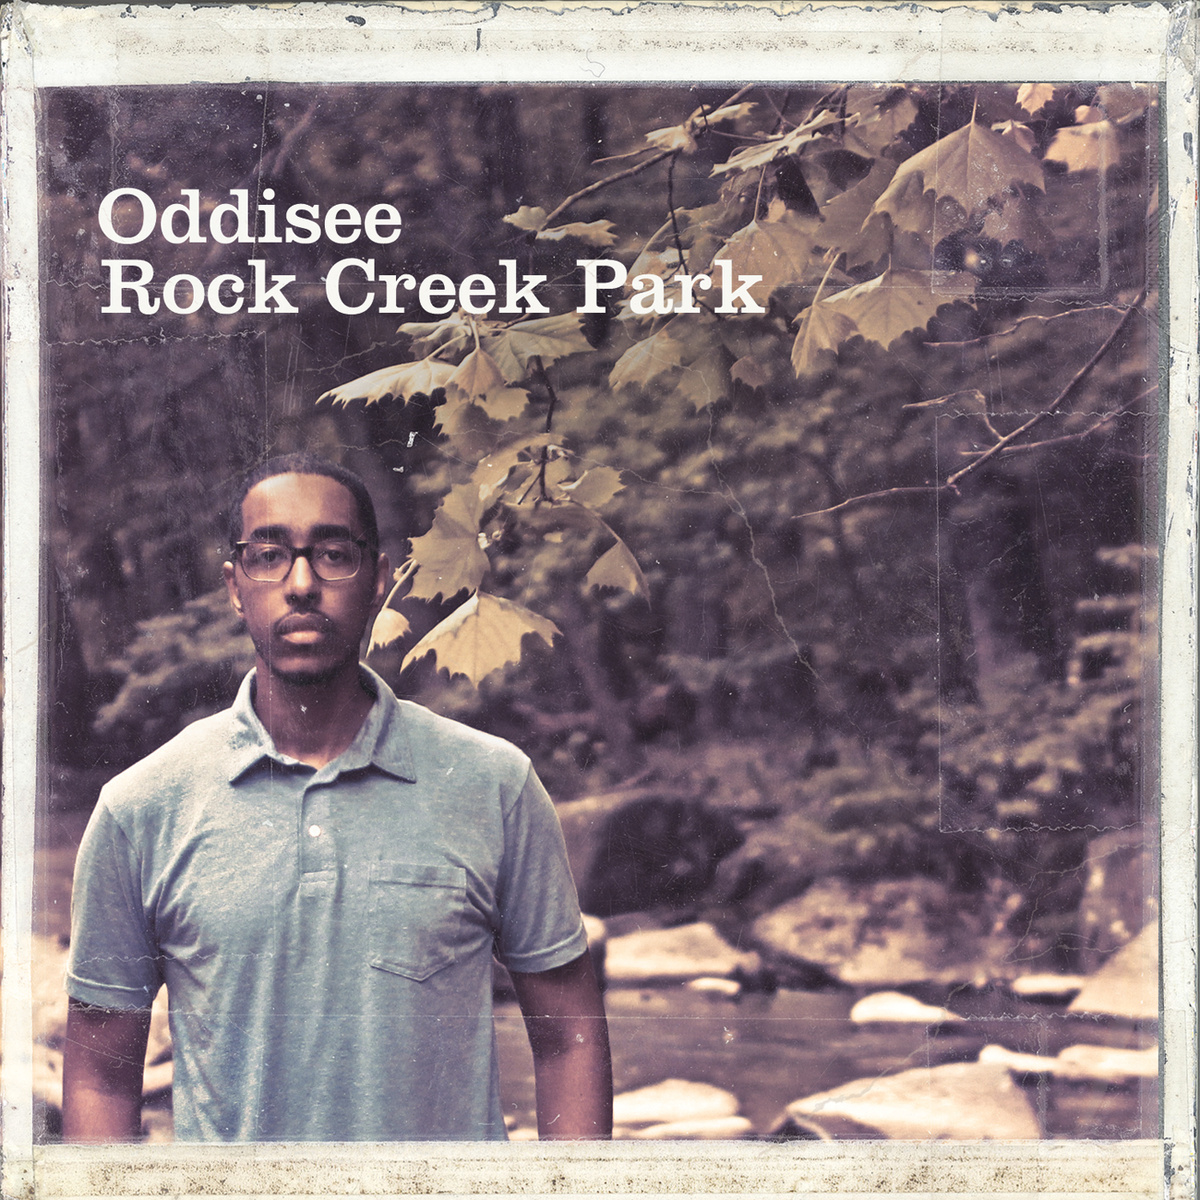 Day 14 of 30 Days of Oddisee: "Rock Creek Park"